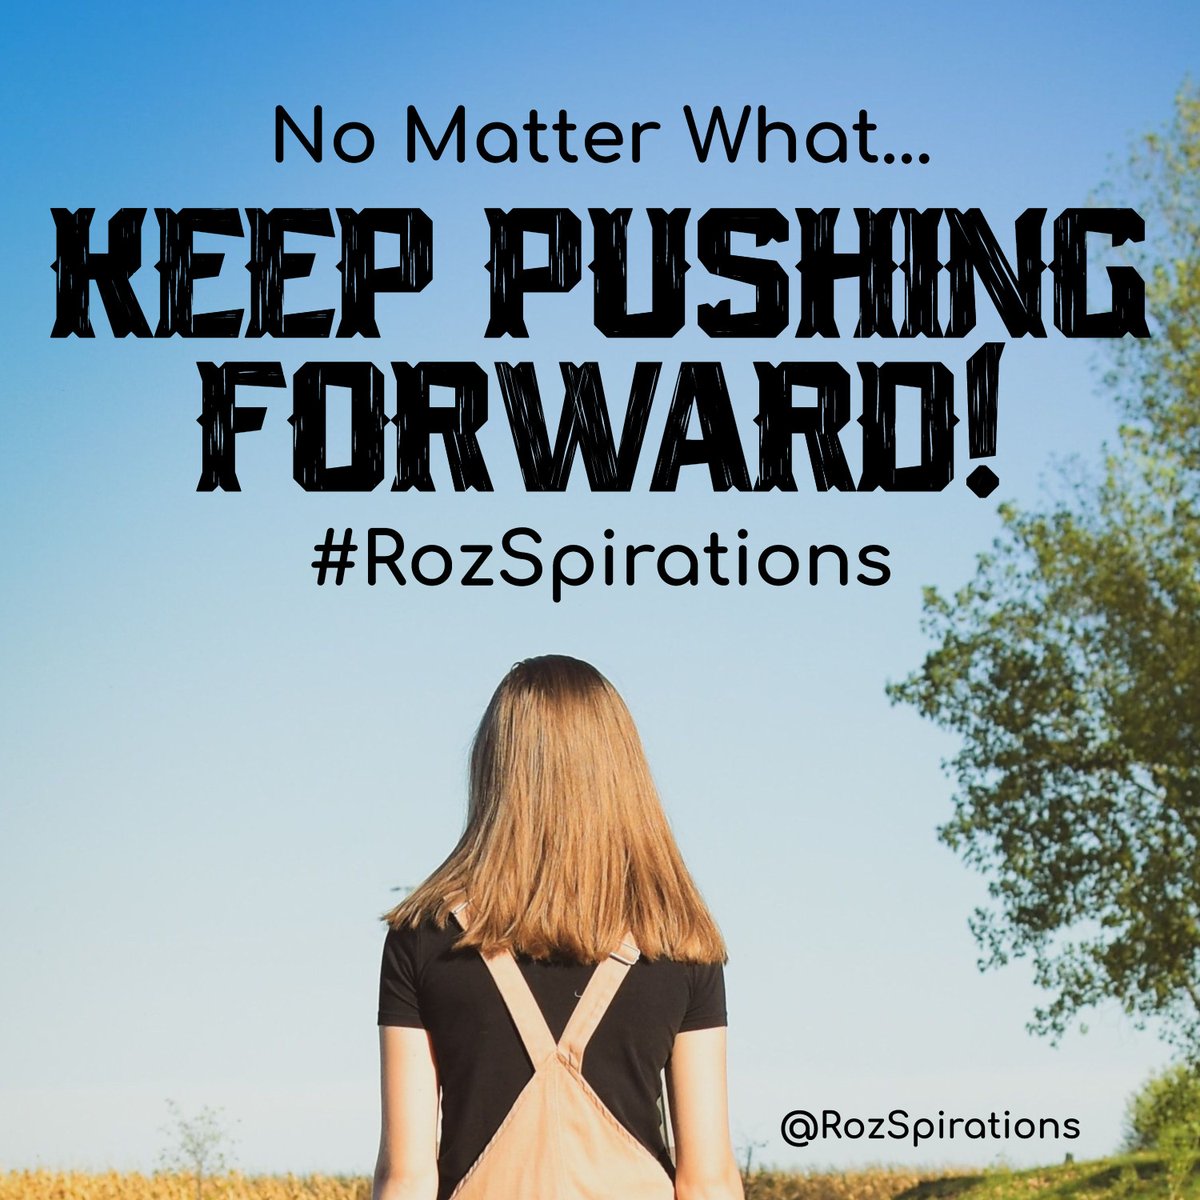 No Matter What... KEEP PUSHING FORWARD! ~#RozSpirations
#ThinkBIGSundayWithMarsha #RozSpirations #joytrain #lovetrain #qotd

It's okay to change your mind/your why, even trash a project. But, do it for the right reasons... TO KEEP PUSHING FORWARD!